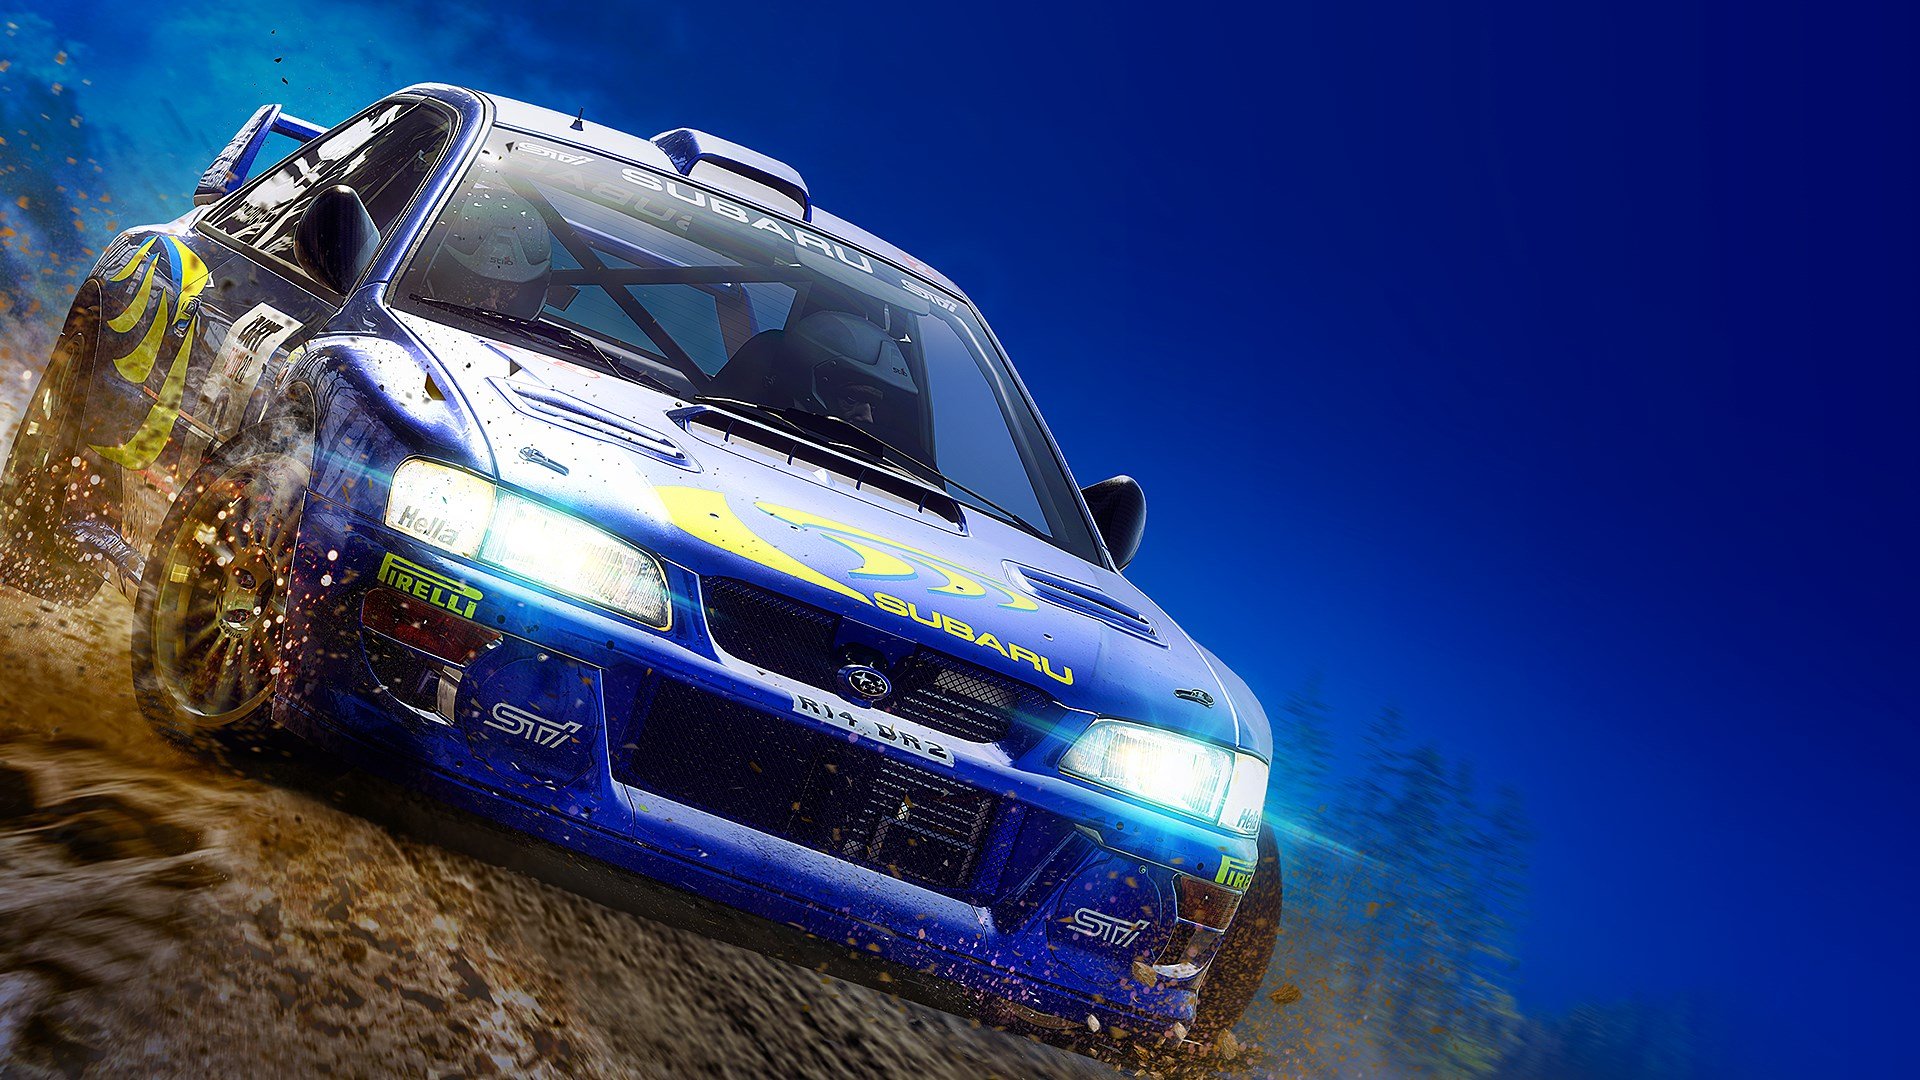 DiRT Rally 2.0 cover image